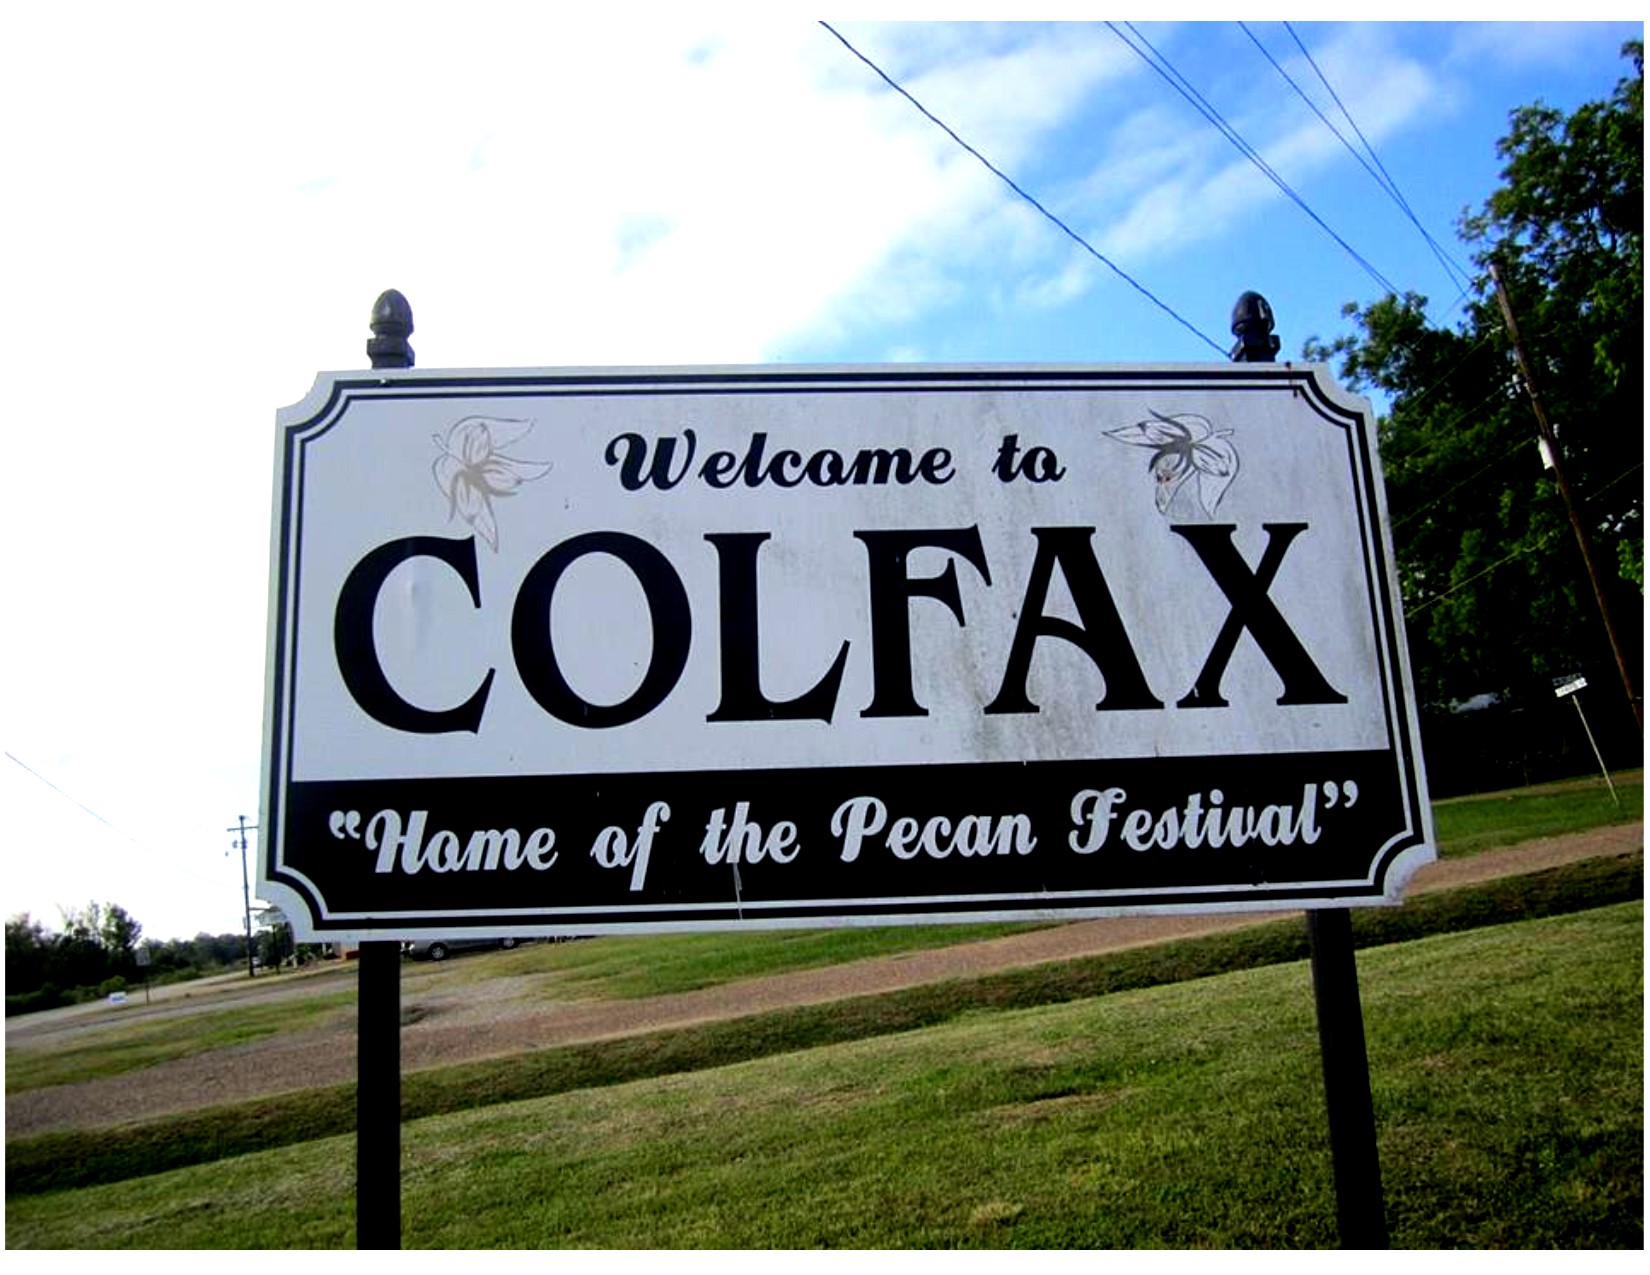 Contact — The Official Website of the Louisiana Pecan Festival